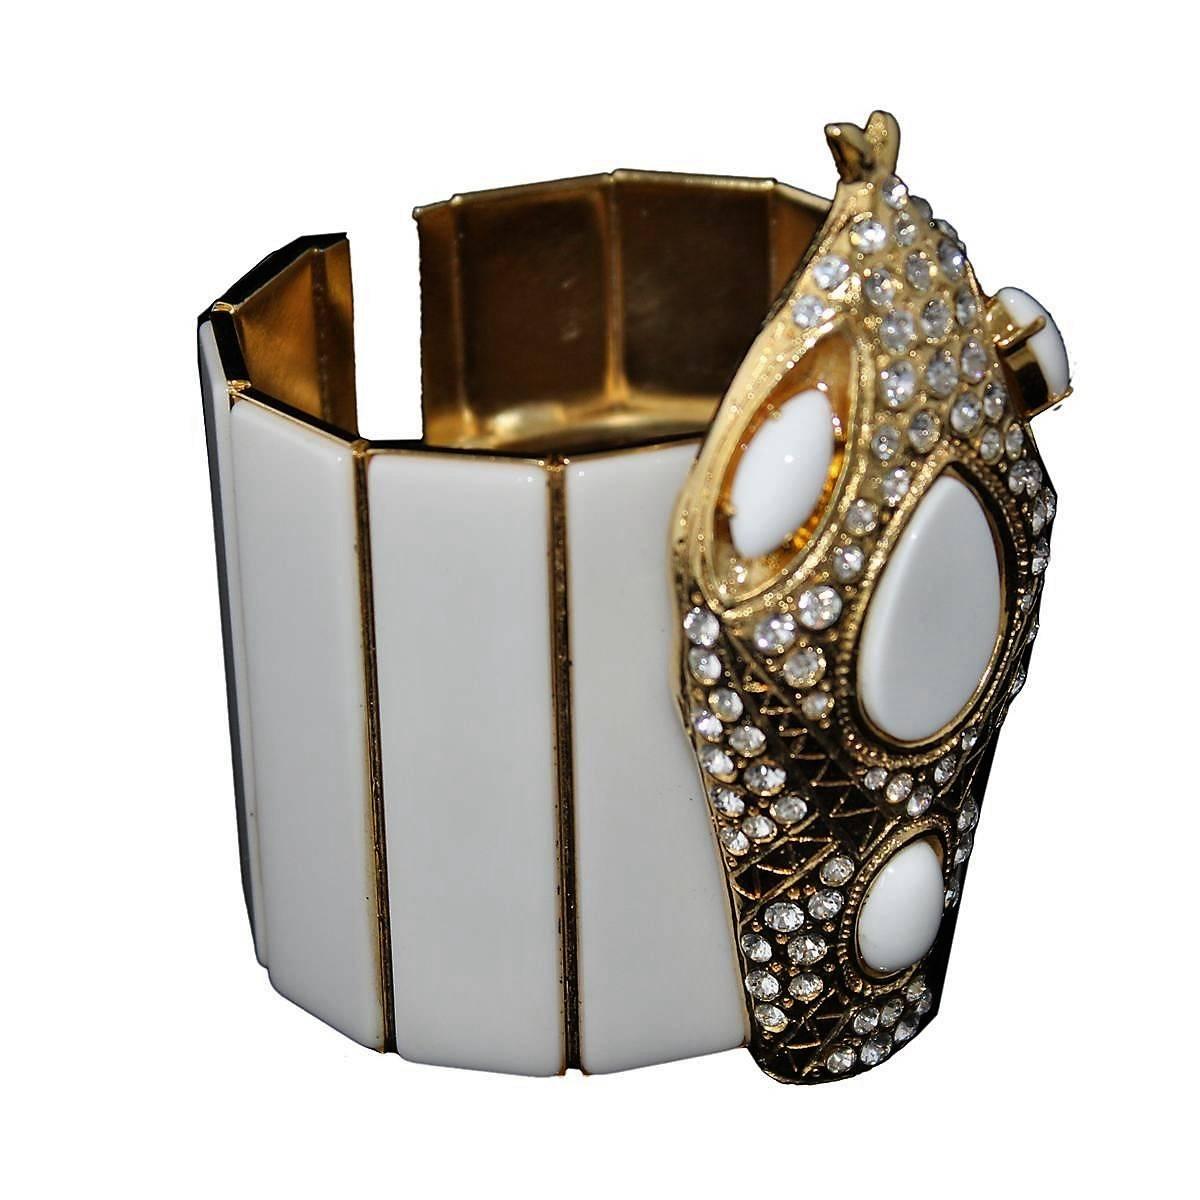 Wonderful bracelet by Carlo Zini
One of the world's greatest bijoux designers
Non allergenic rhodium
Gold dipped
Amazing hand creation of crystals and white resins
Total width cm 6,5 (2.55 inches)
Wrist cm 17 (6.69 inches)
Snake length cm 10 (3.93